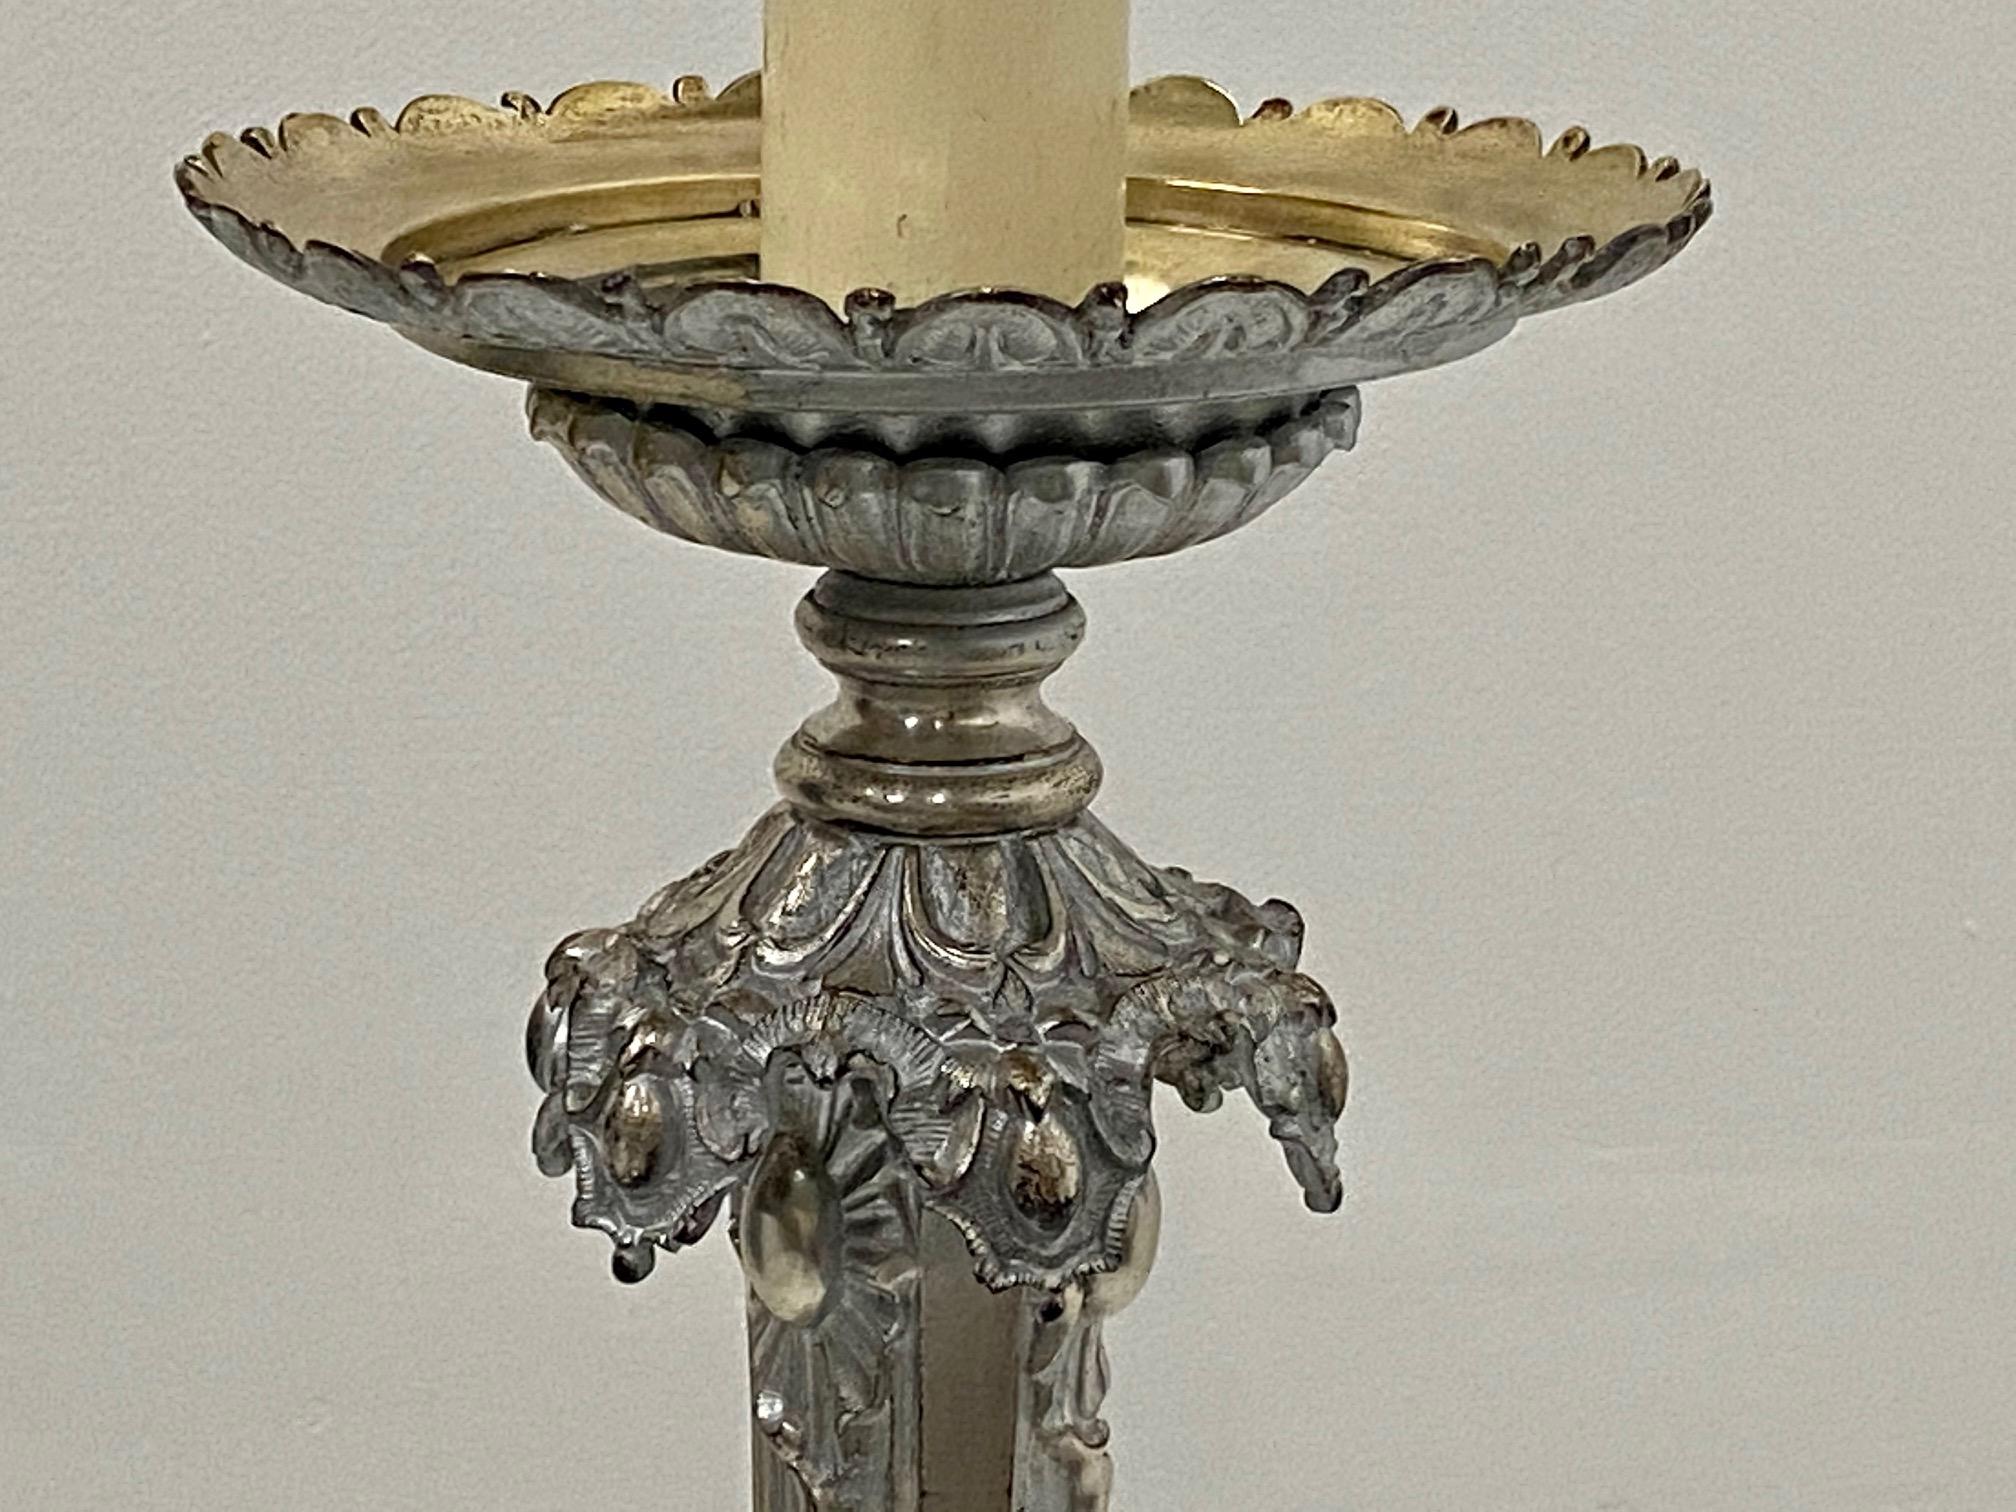 Very fancy French silverplate on bronze floor lamp having gorgeous detailed casting and new wiring.
No shade included.